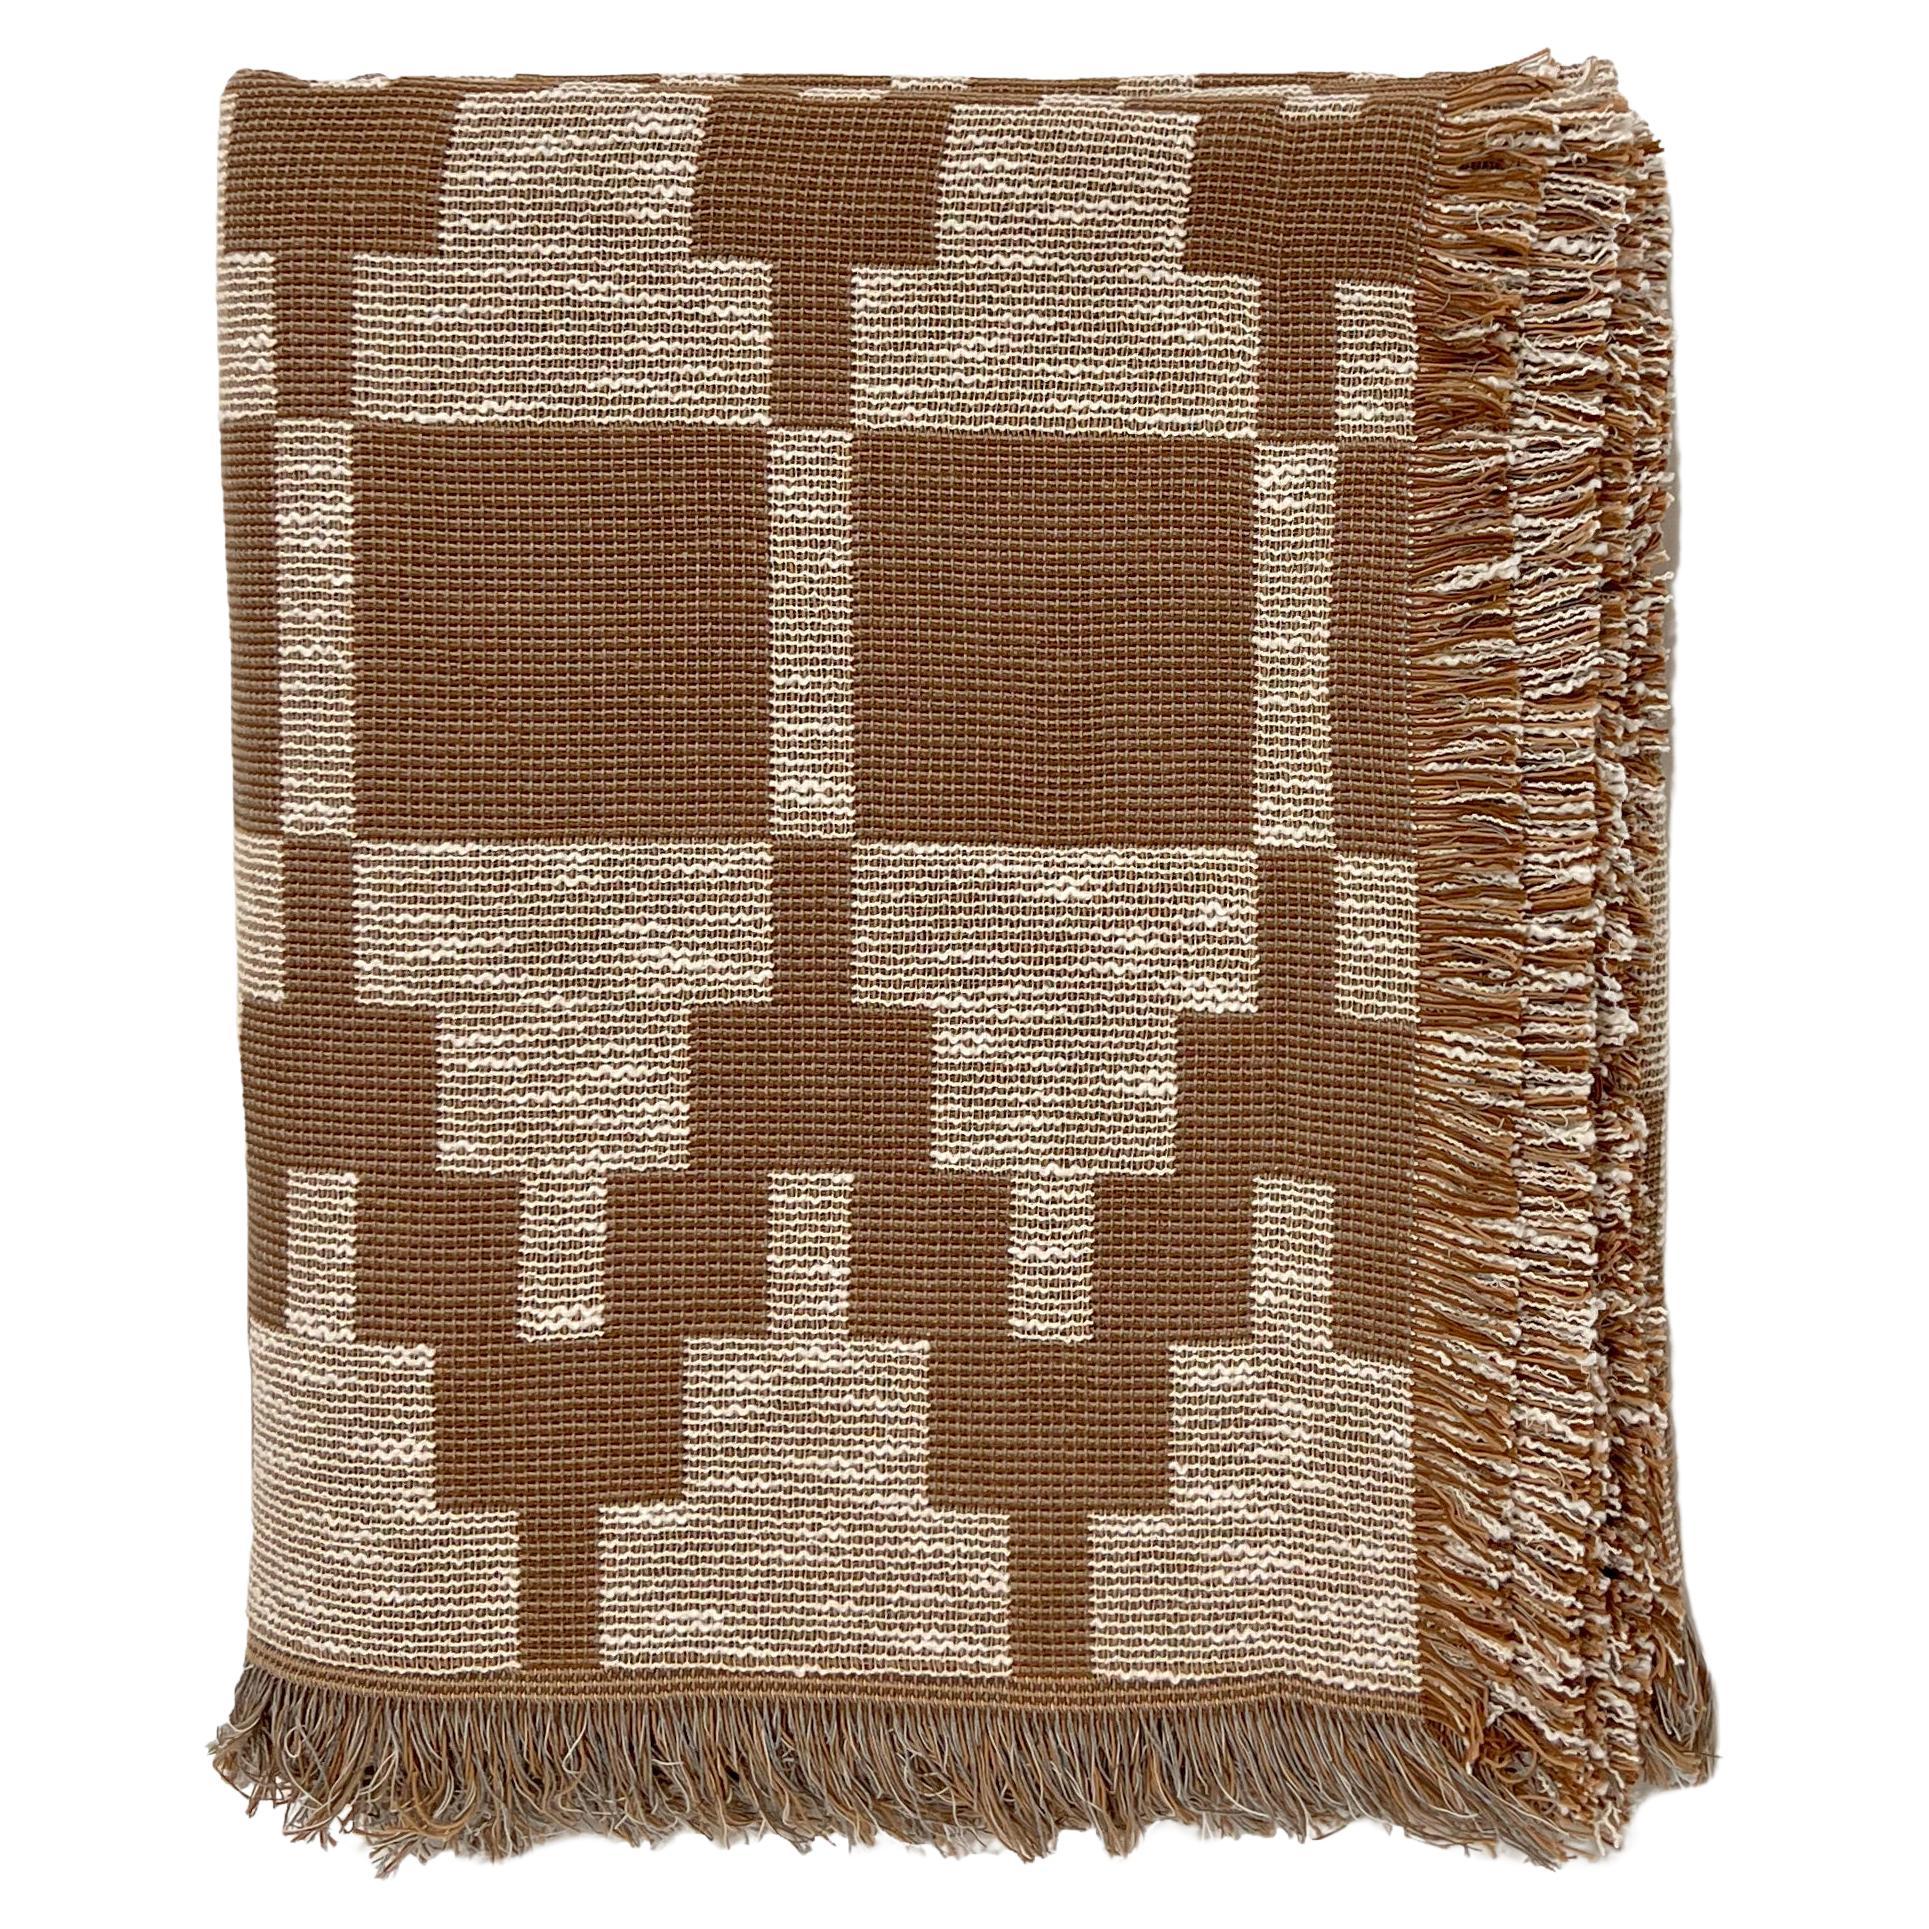 Patterned Woven Cotton Throw Blanket by Folk Textiles (Willa / Mud) For Sale